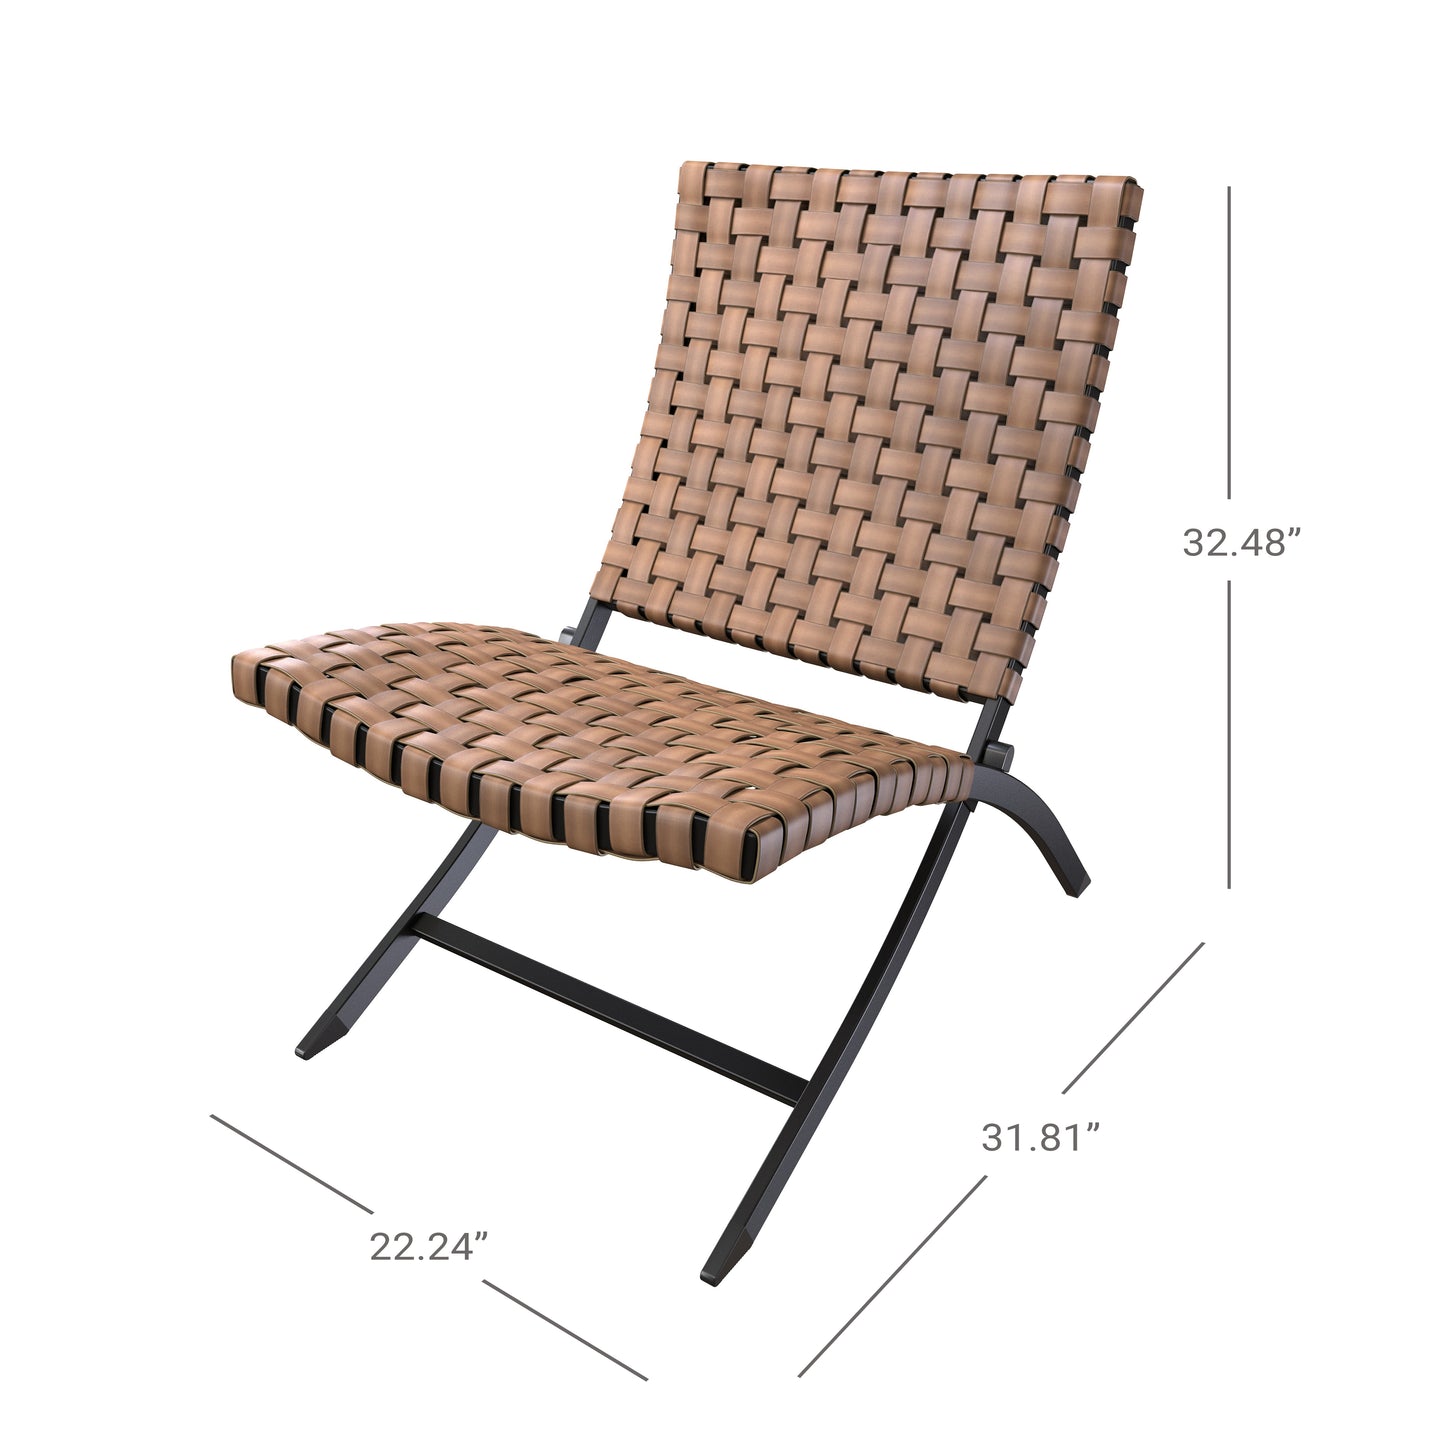 3 Piece Rattan Patio Set  Foldable Wicker Lounger Chairs and Coffee Table Set